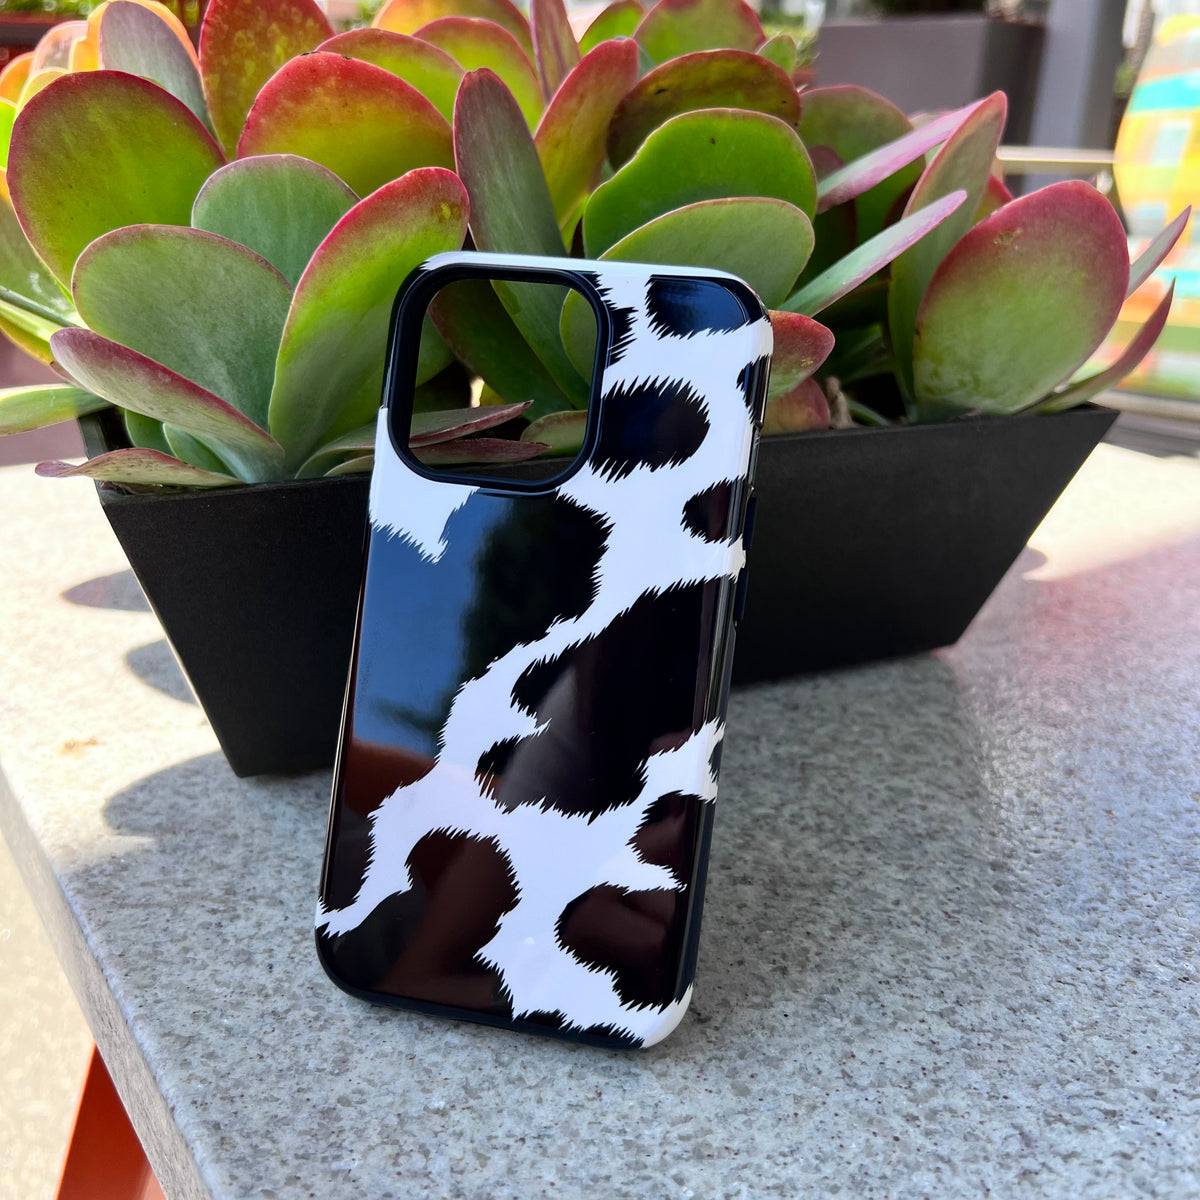 Cow Skin iPhone Case - iPhone 11